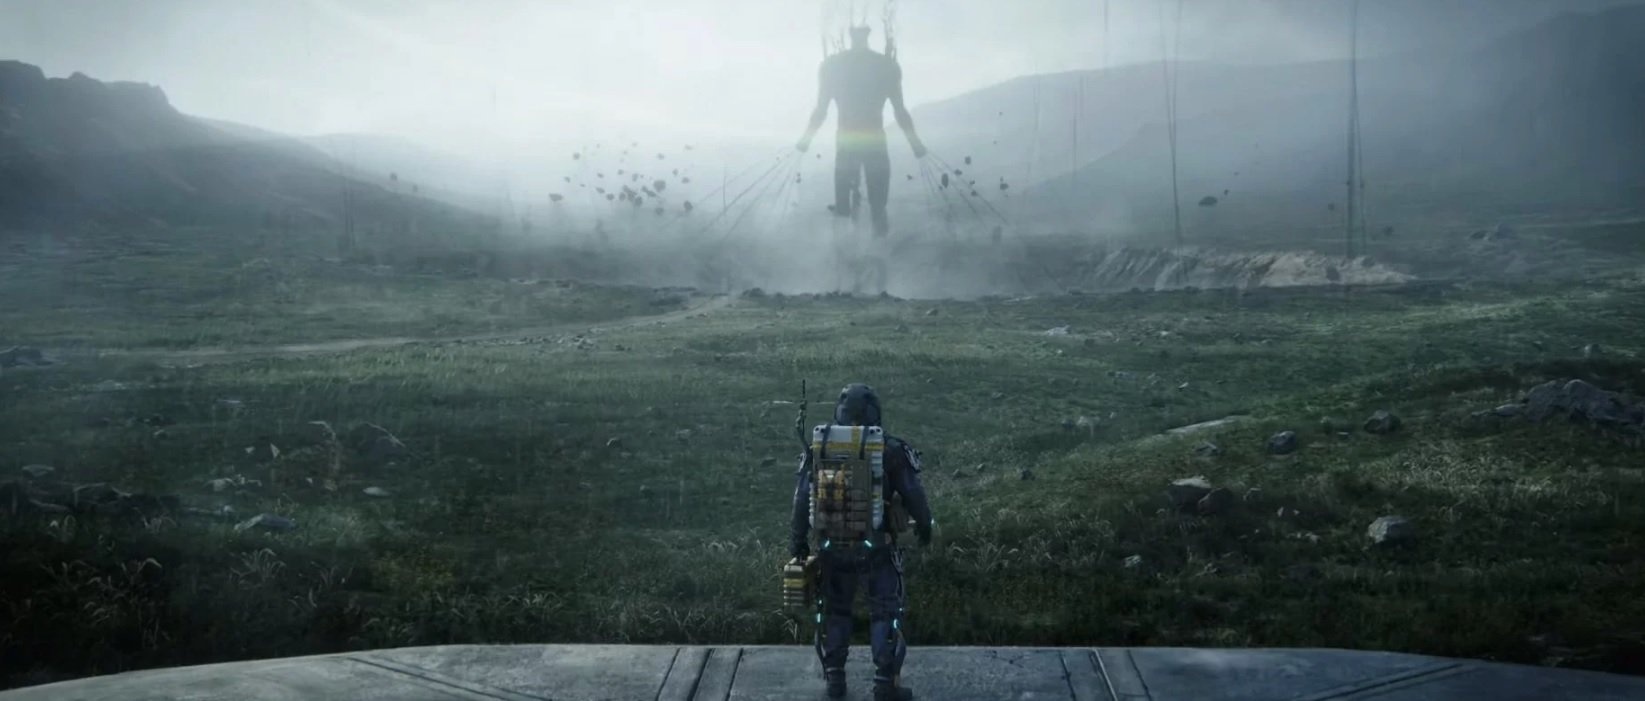 Death Stranding PC Scores an 86 on Metacritic : r/DeathStranding